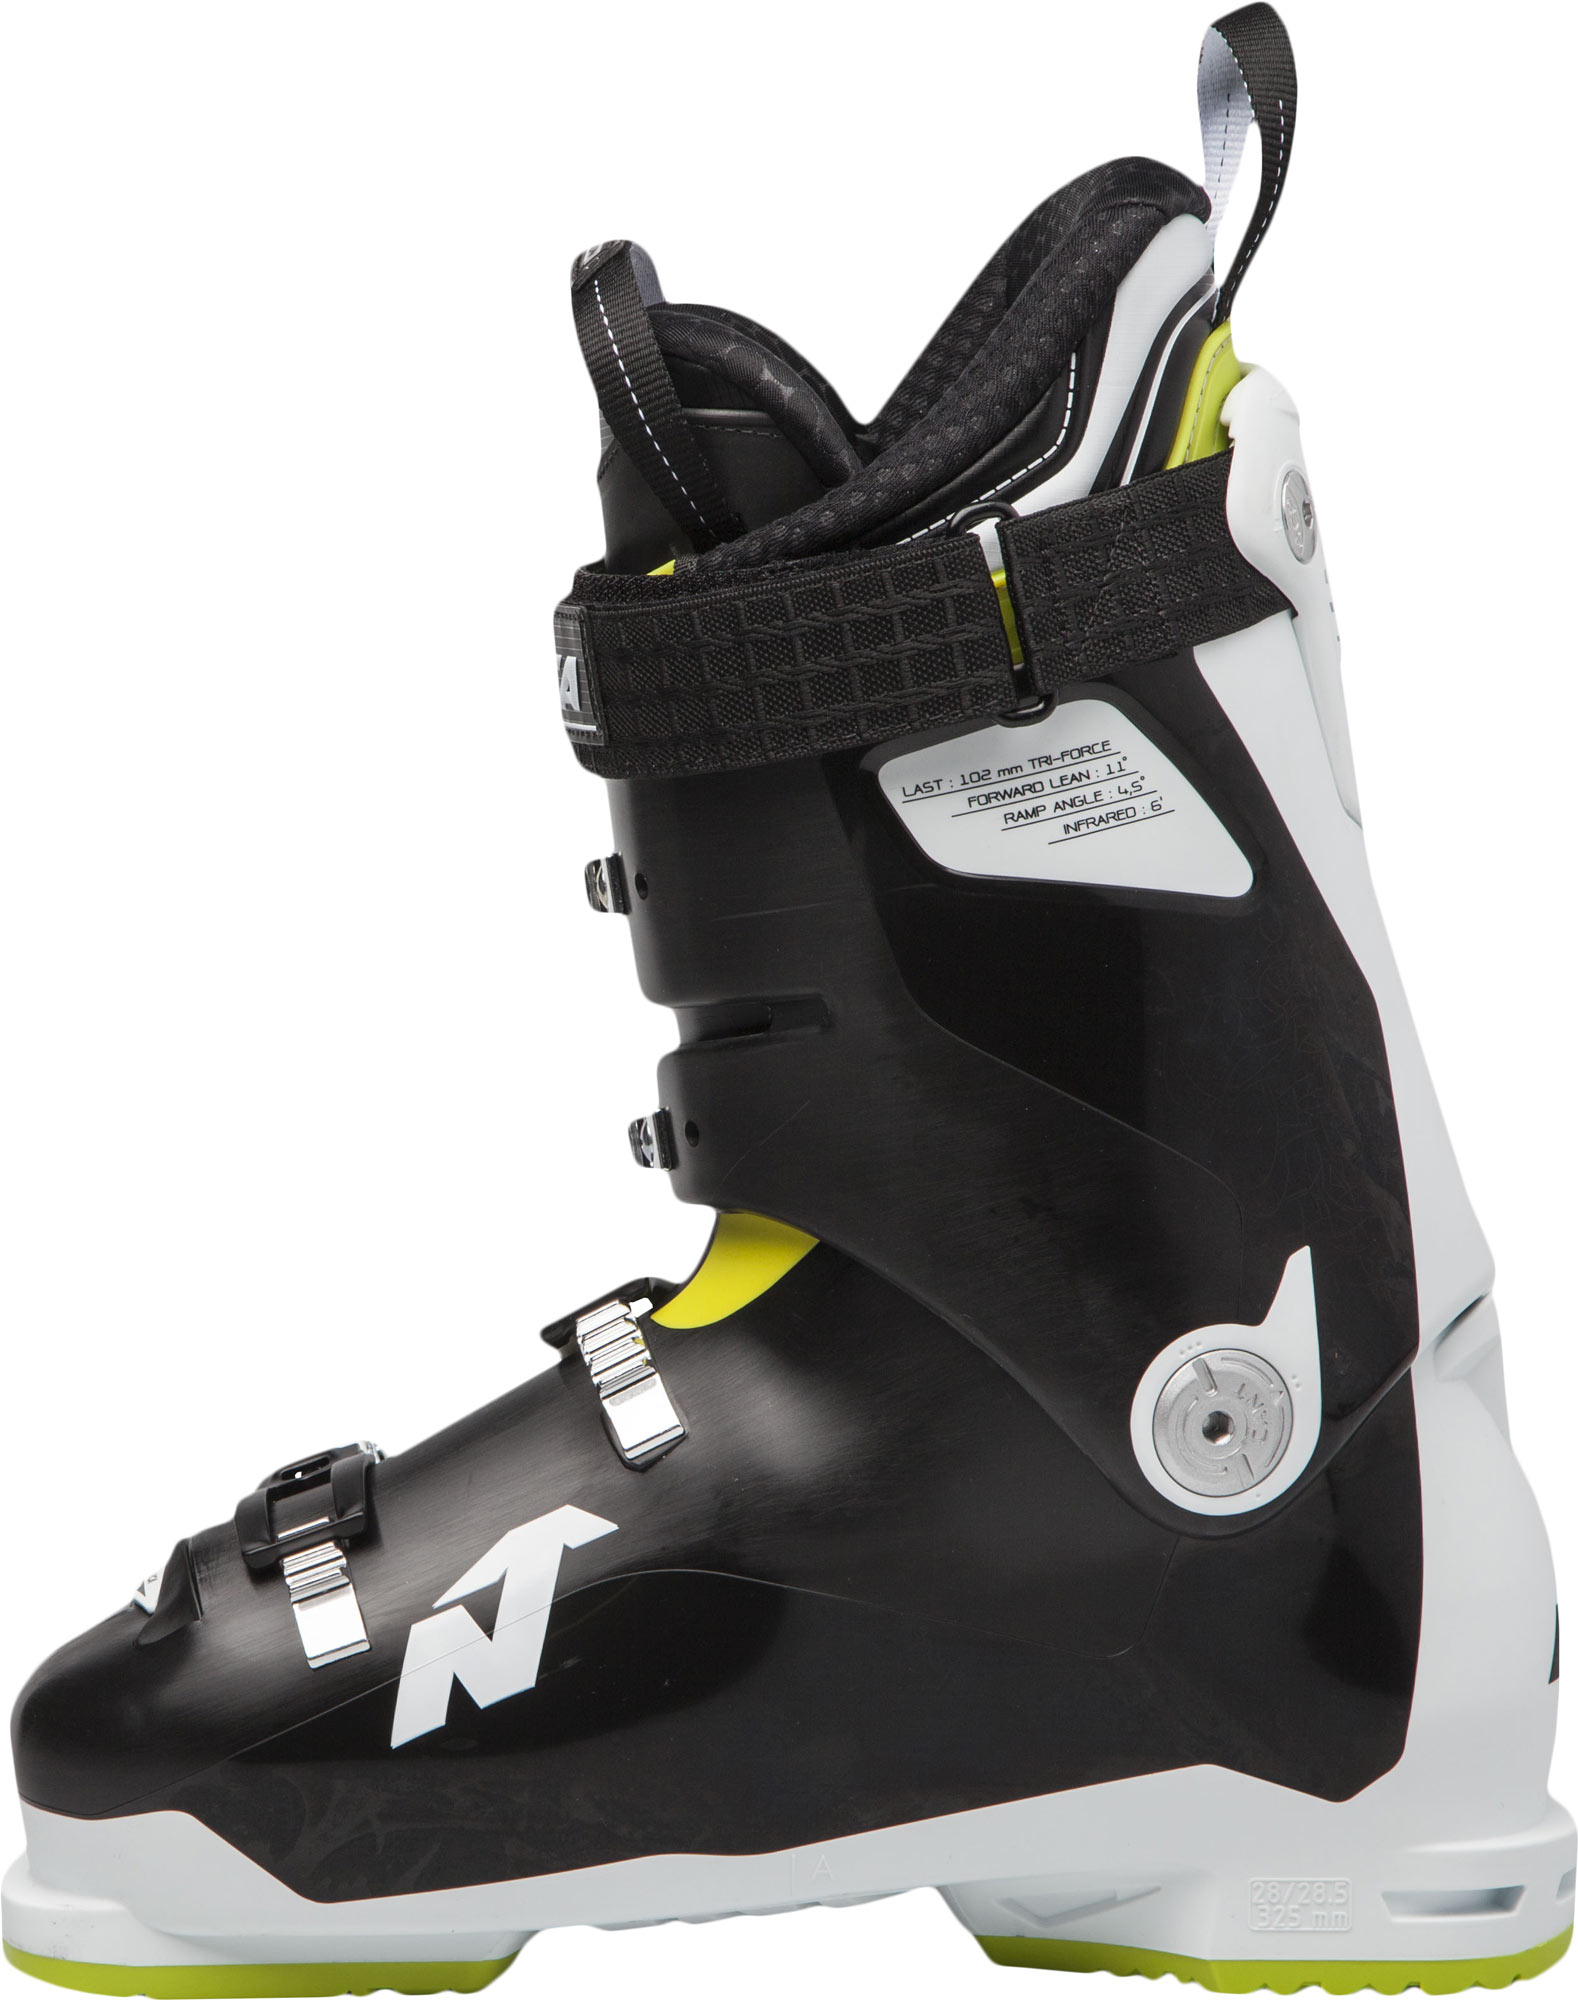 Downhill boots